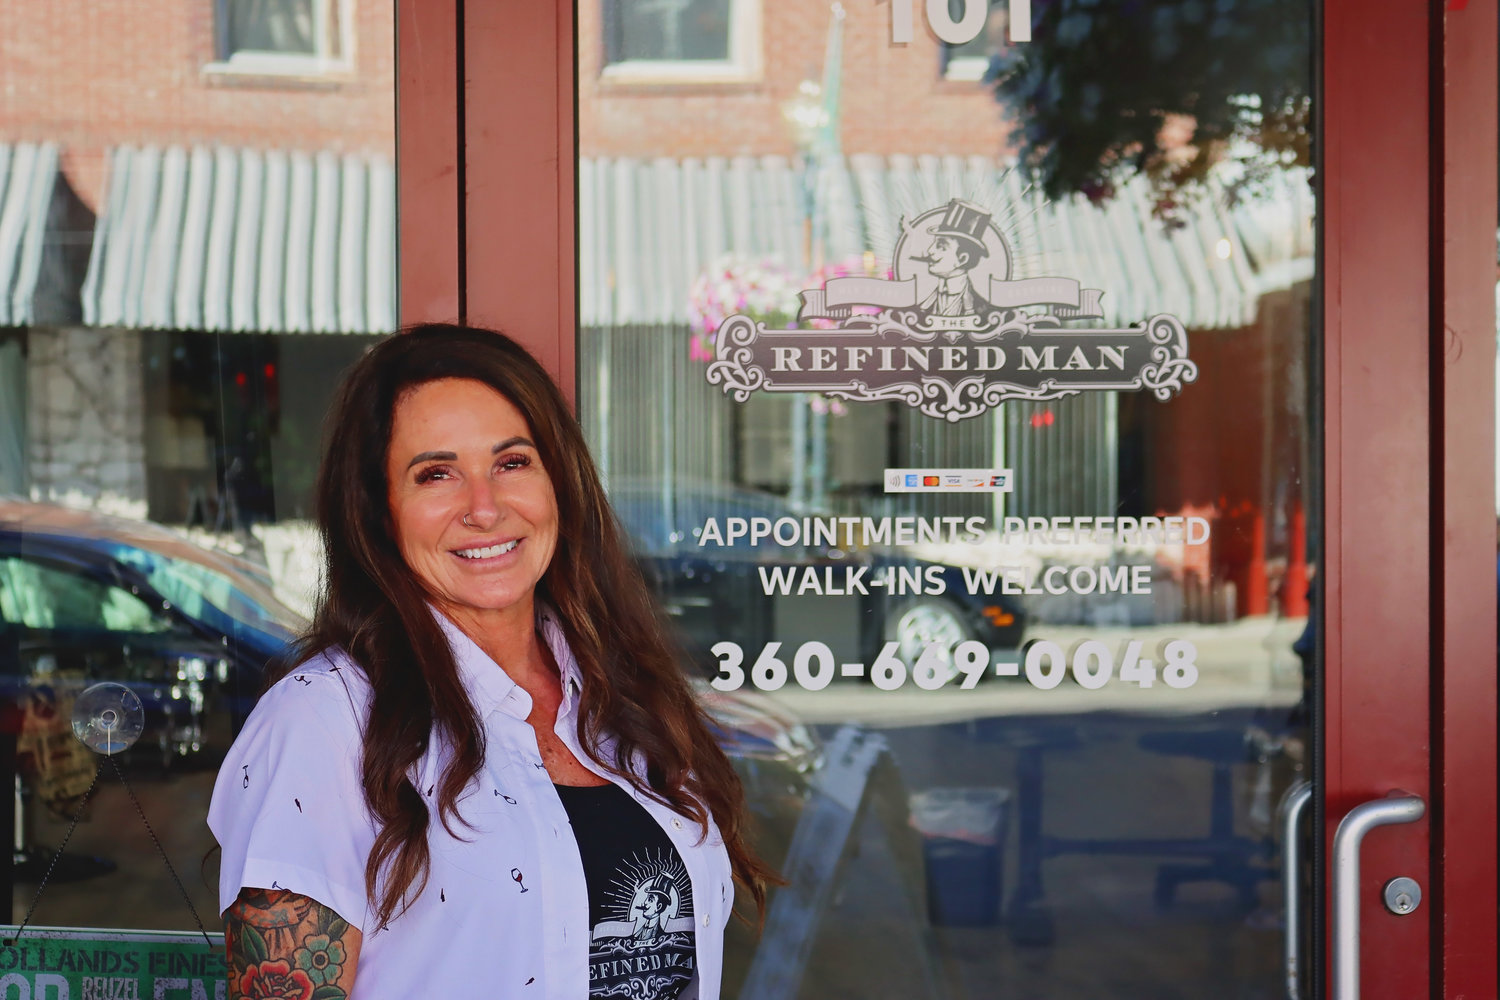 The Refined Man owner Shawna Charboneau